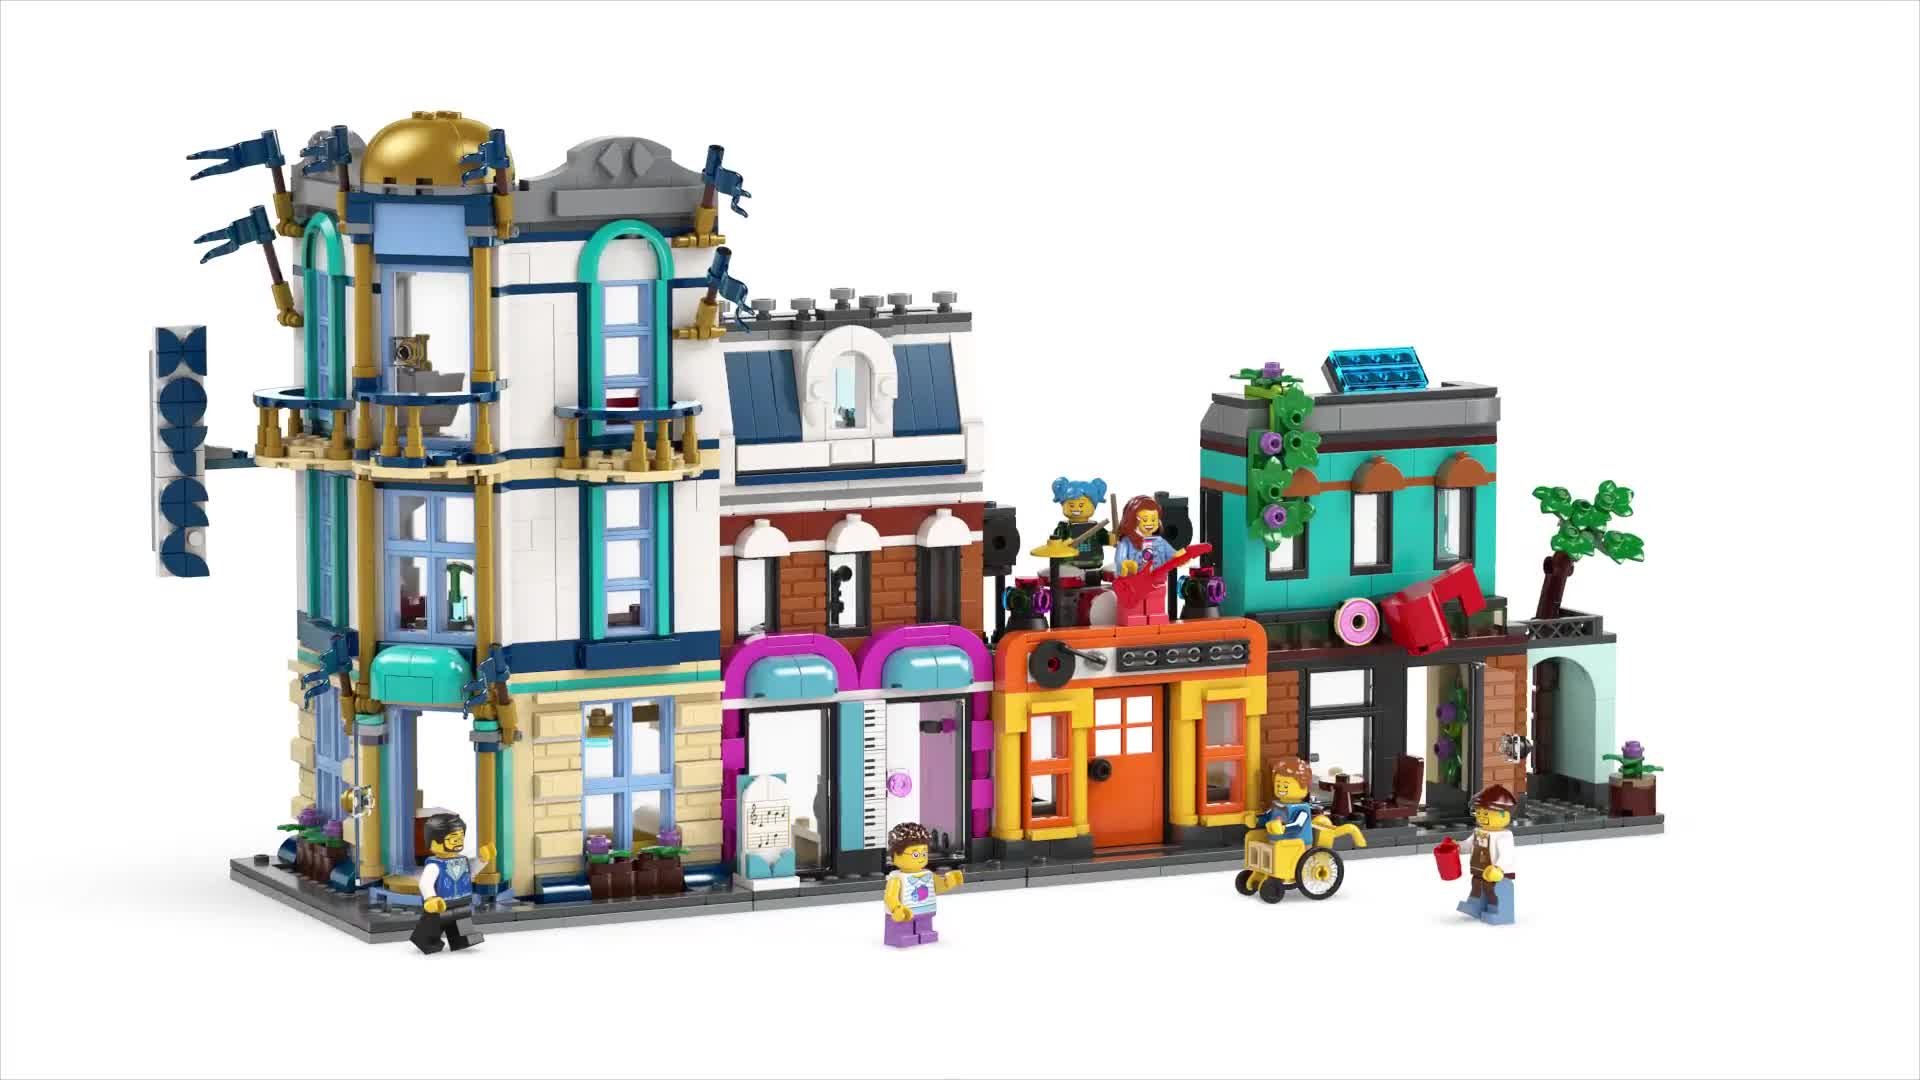 LEGO Creator Main Street 31141 Building Toy Set, 3 in 1 Features a Toy City  Art Deco Building, Market Street Hotel, Café Music Store and 6